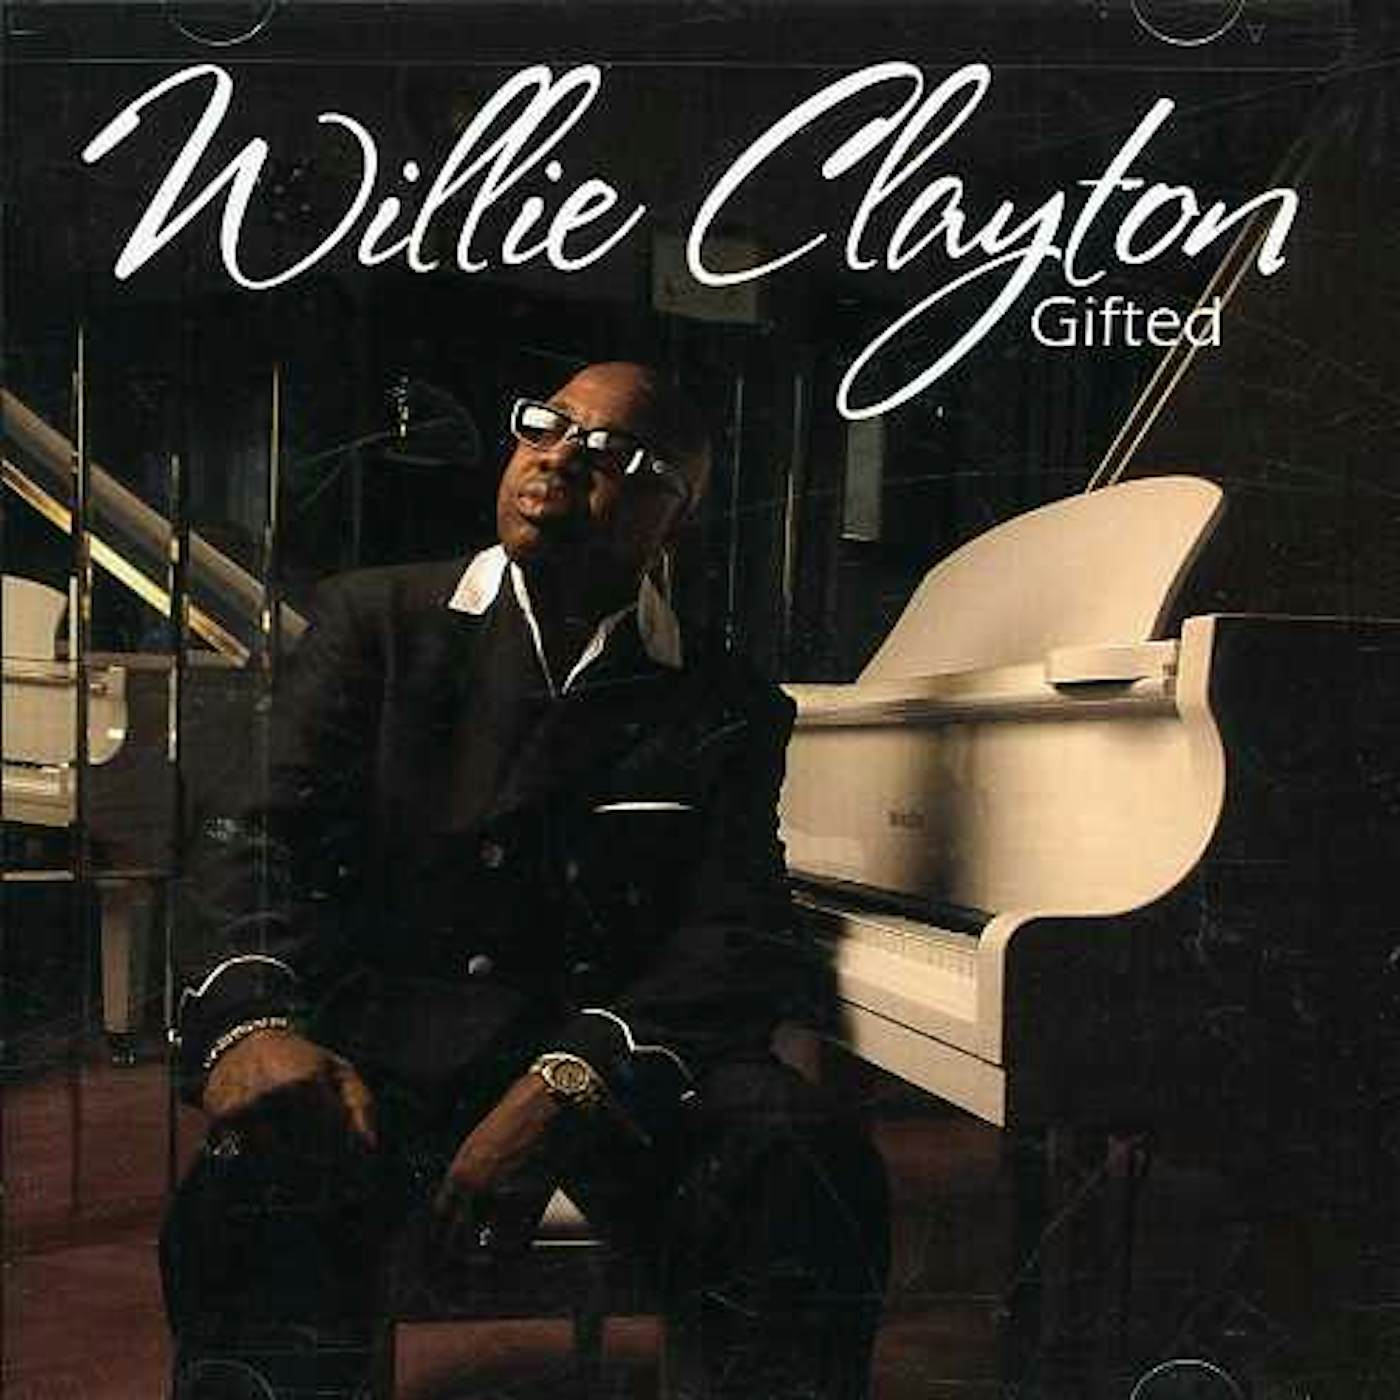 Willie Clayton GIFTED CD